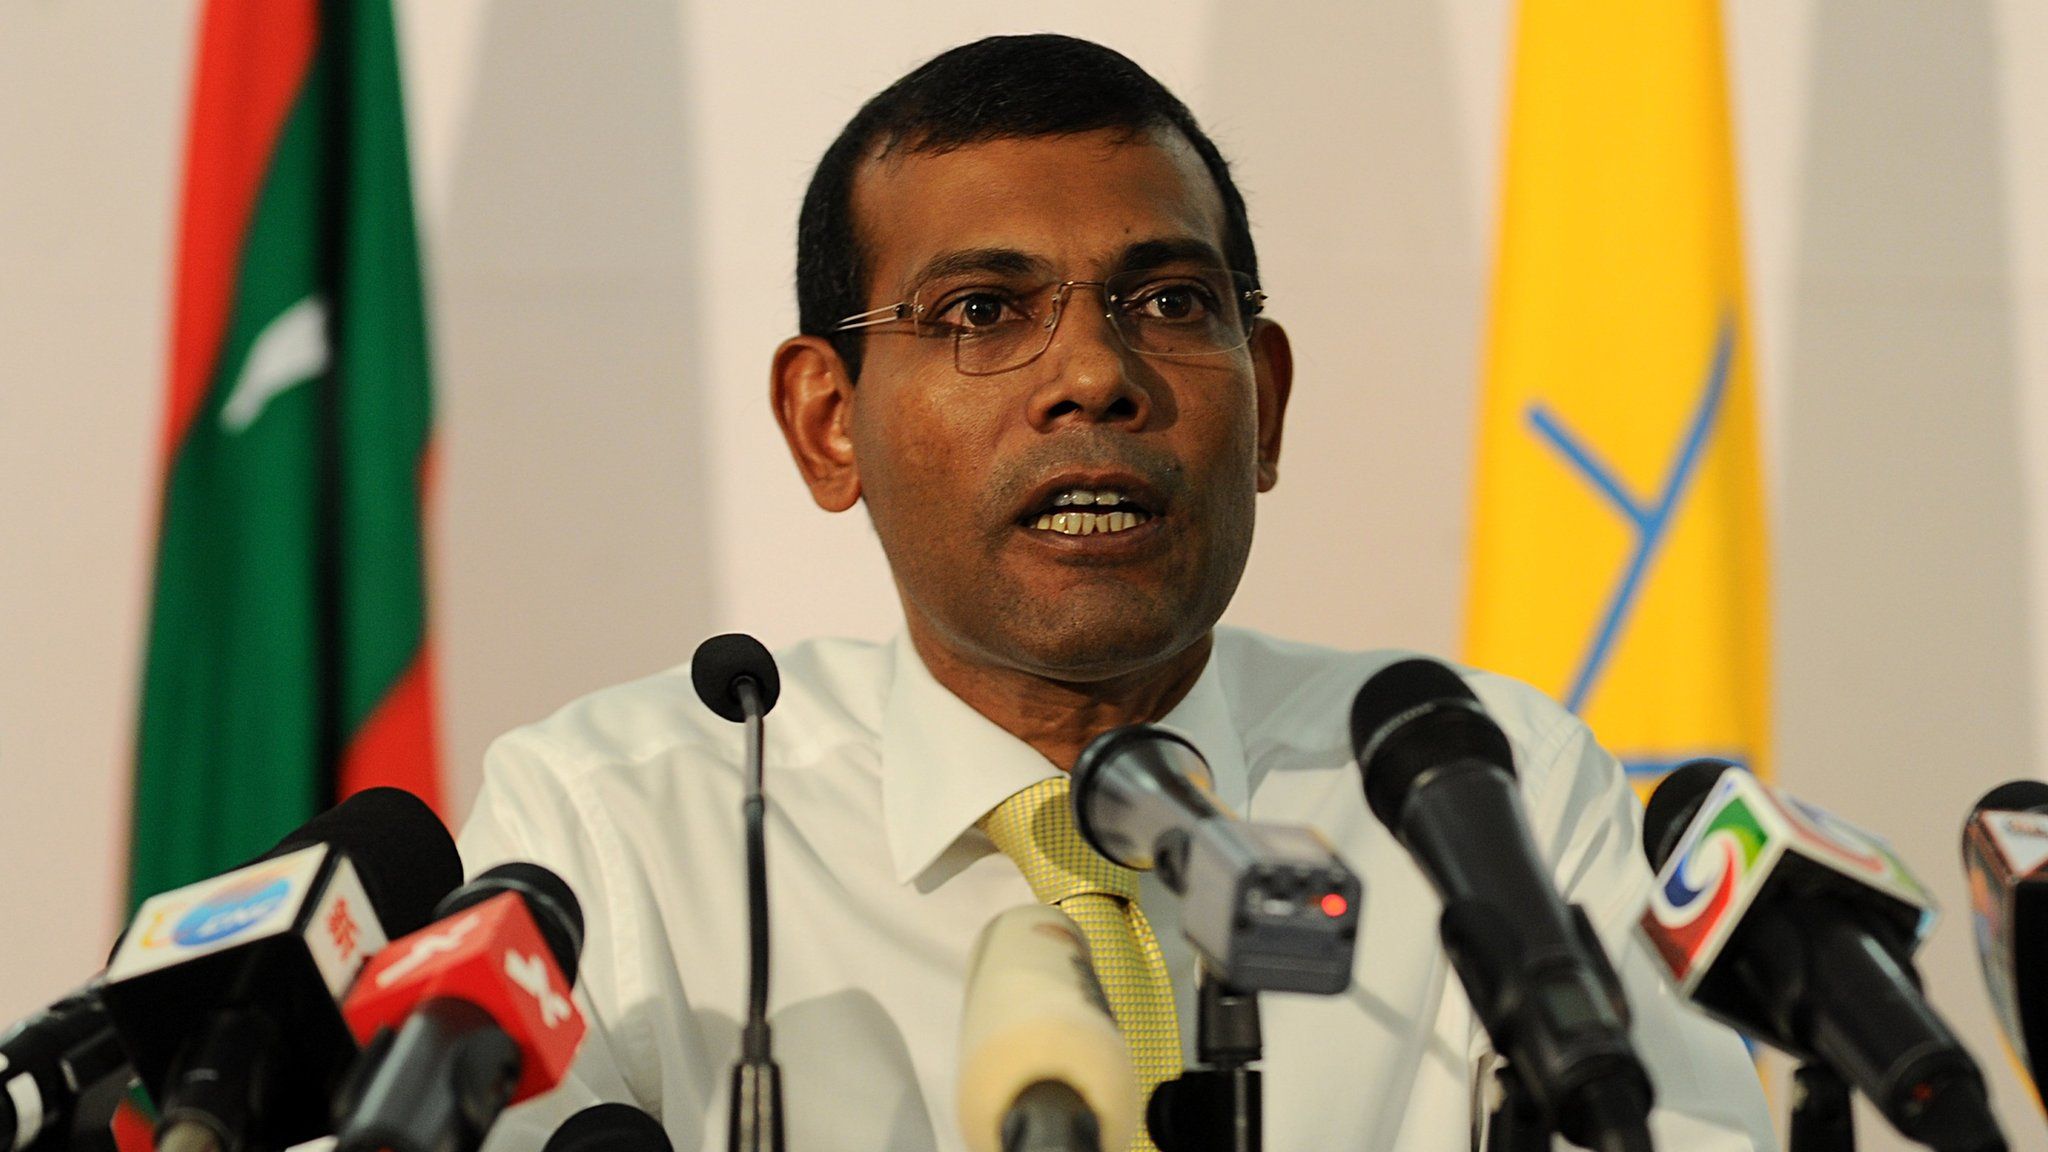 Mohamed Nasheed speaks during a press conference in Male, 10 November 2013.